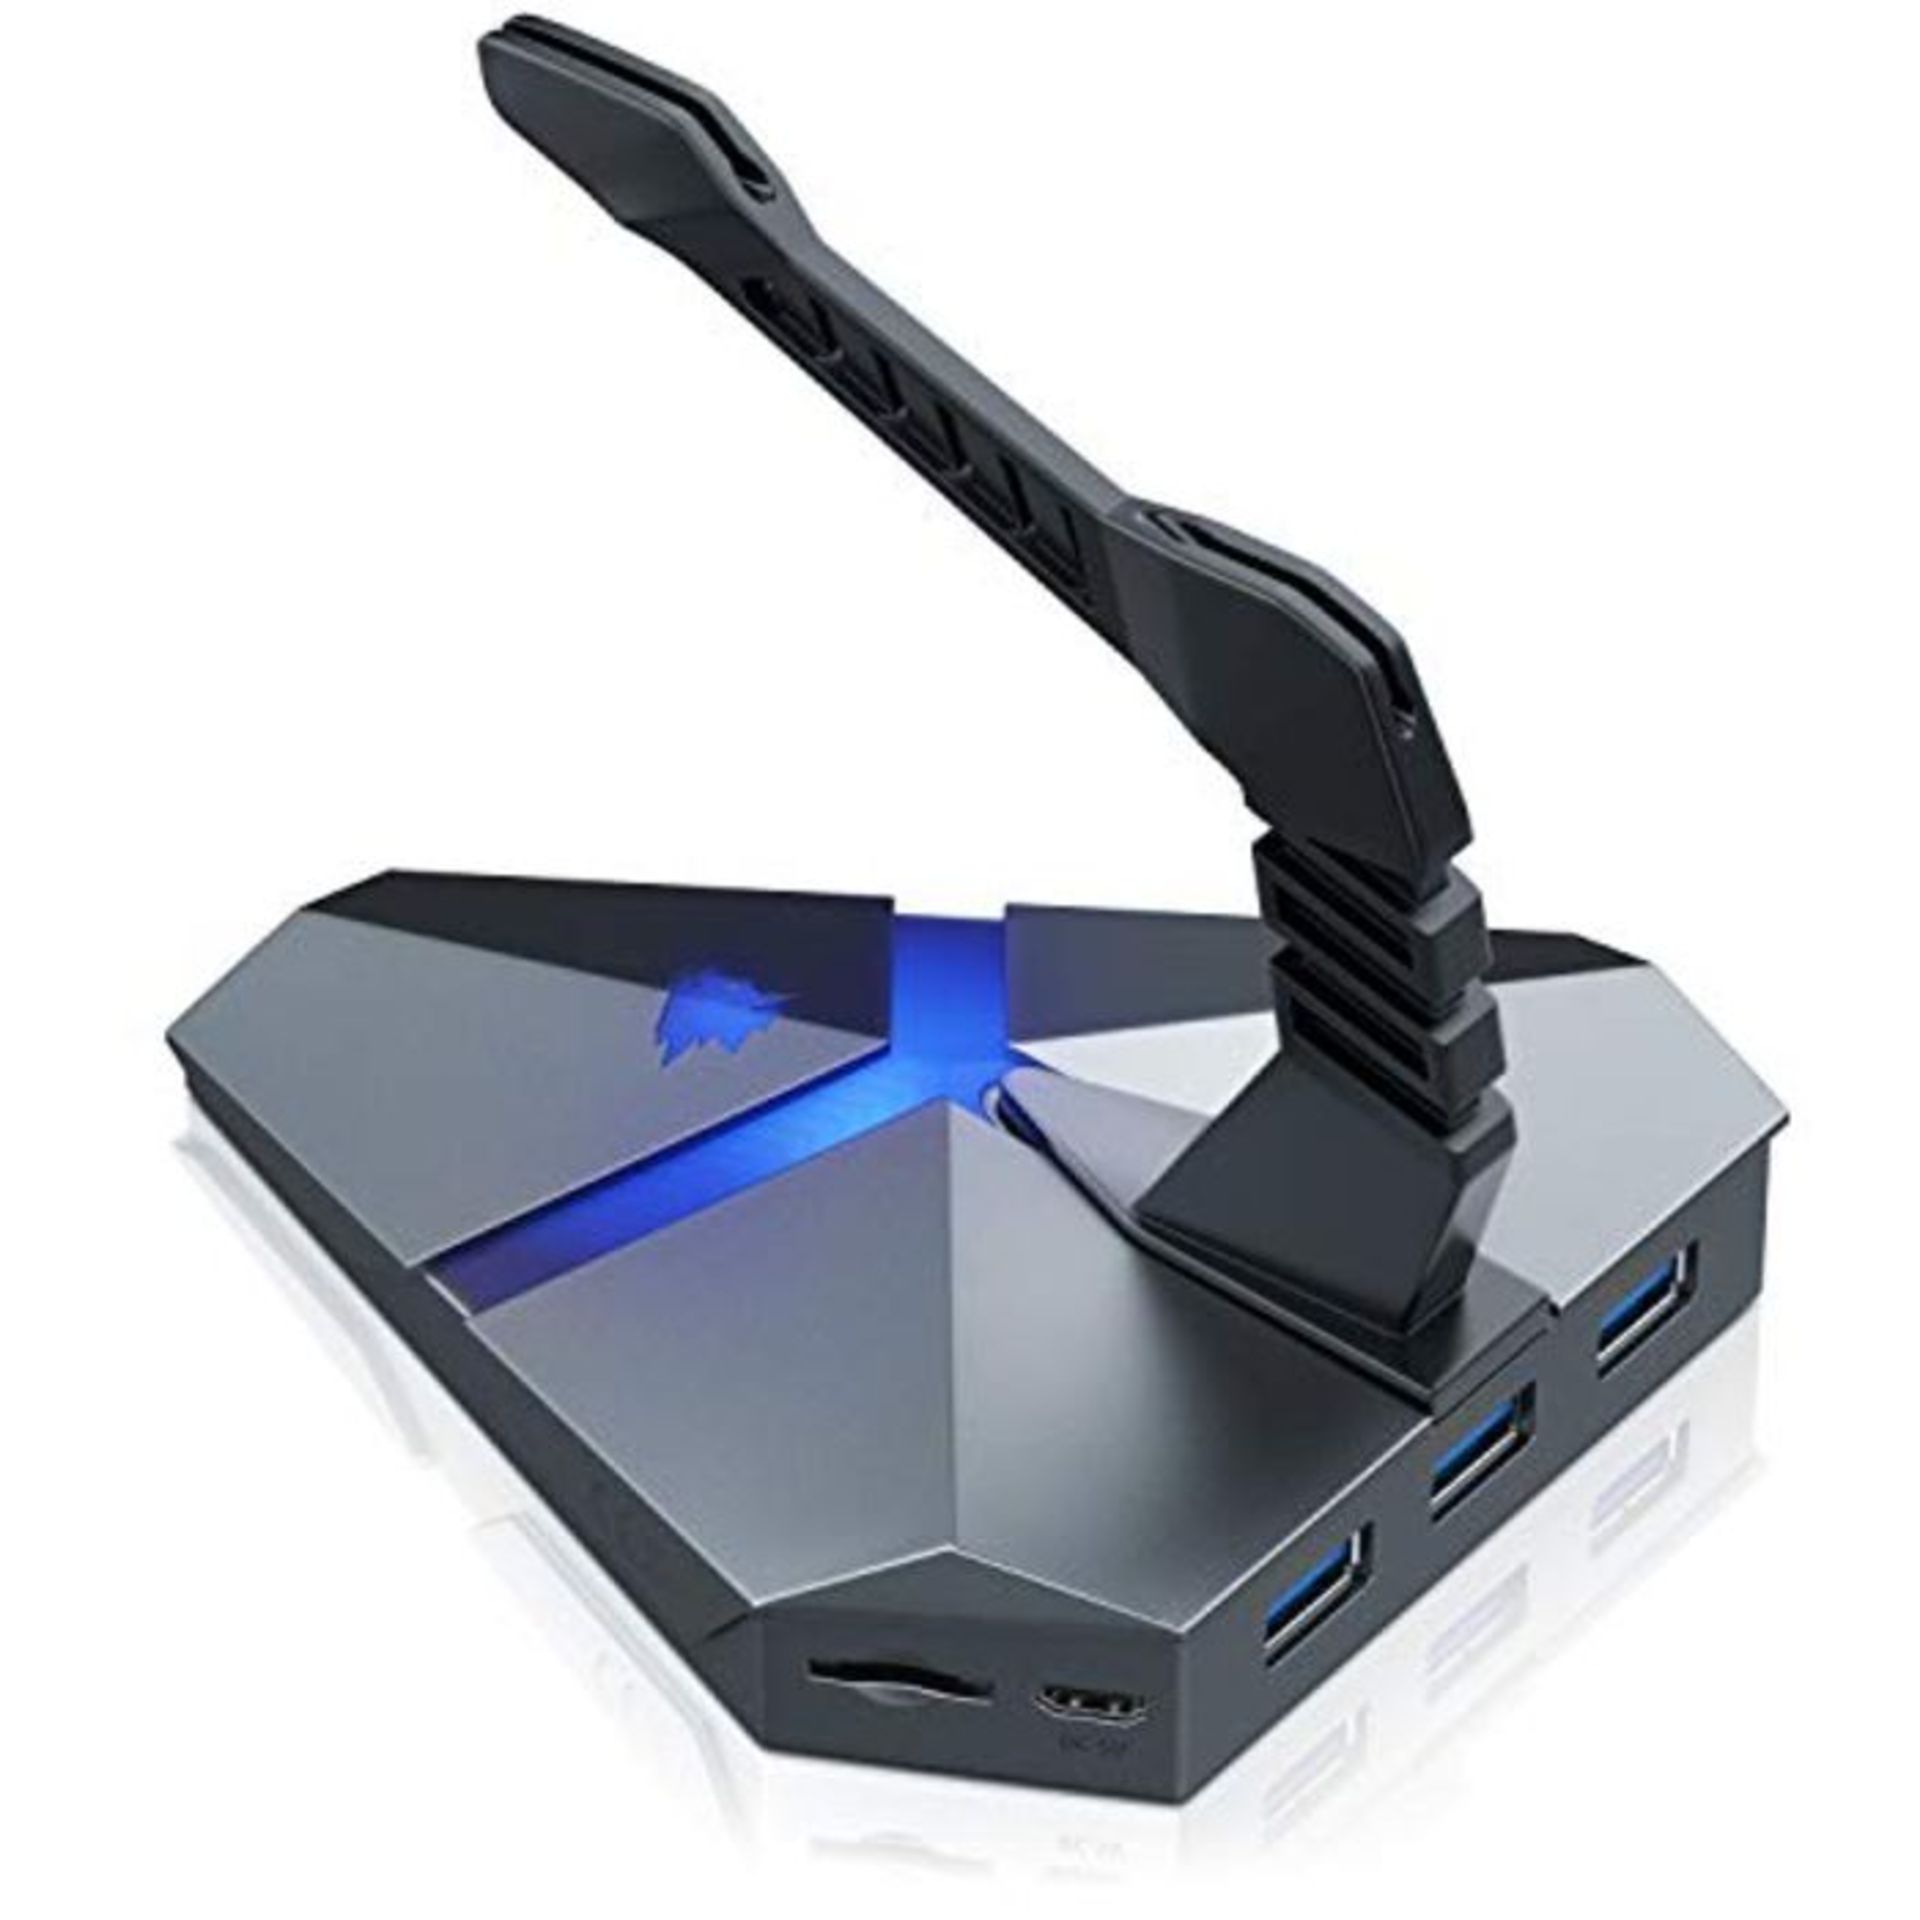 CSL-Computer Gaming mouse bungee with USB hub and card reader for e-sports with 3X USB